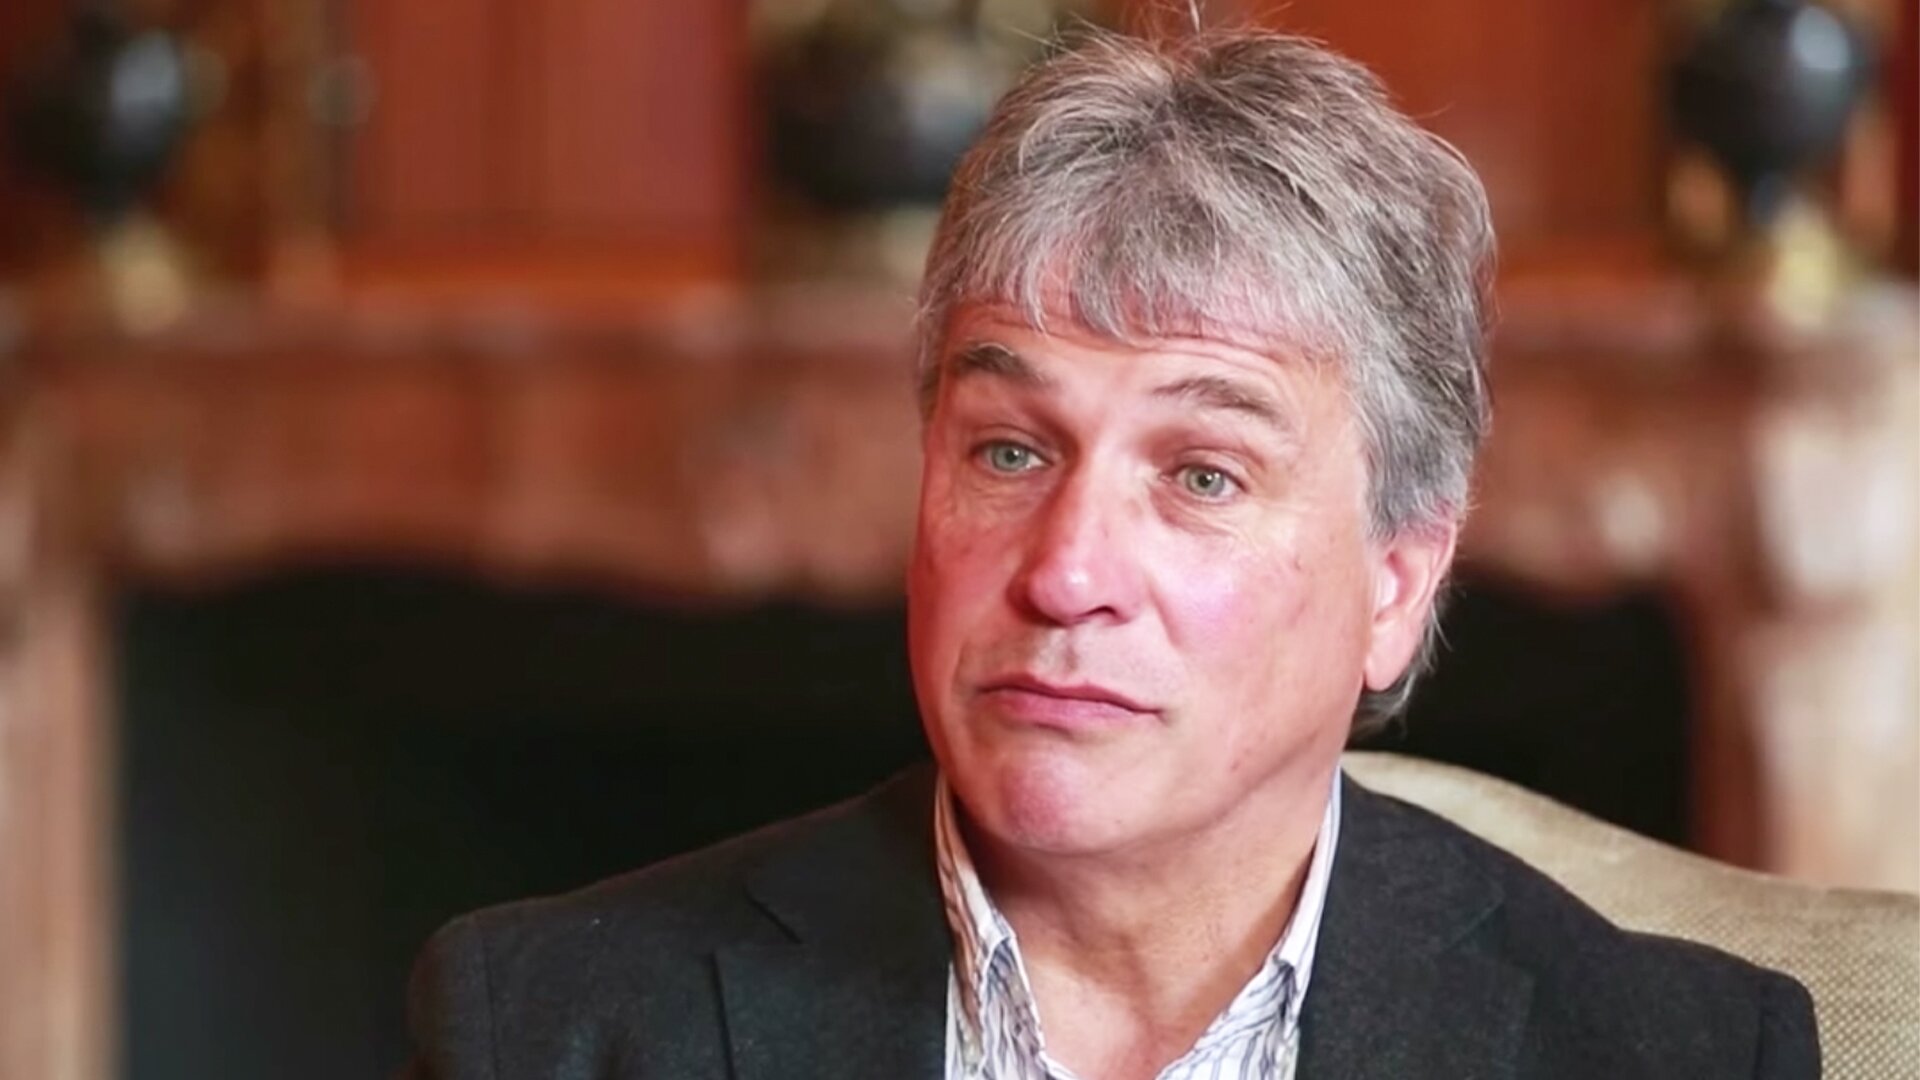 Rejoice or despair? - Major update on John Inverdale and his future in Six Nations Rugby